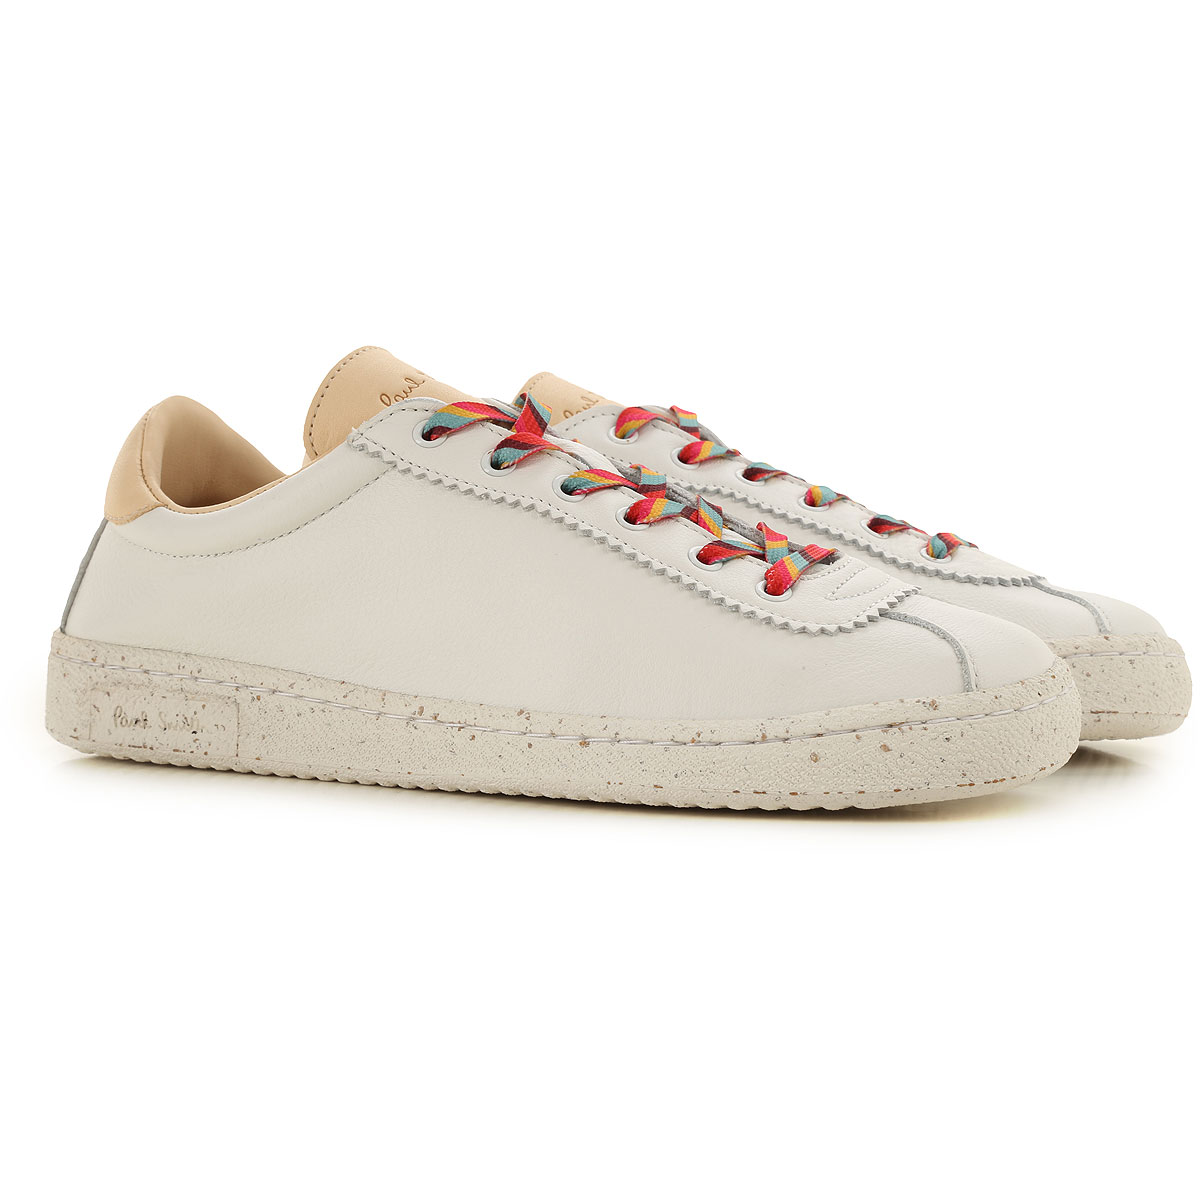 Paul SmithPaul Smith Sneakers for Women On Sale, White, Leather, 2019, 10 7  9 | DailyMail